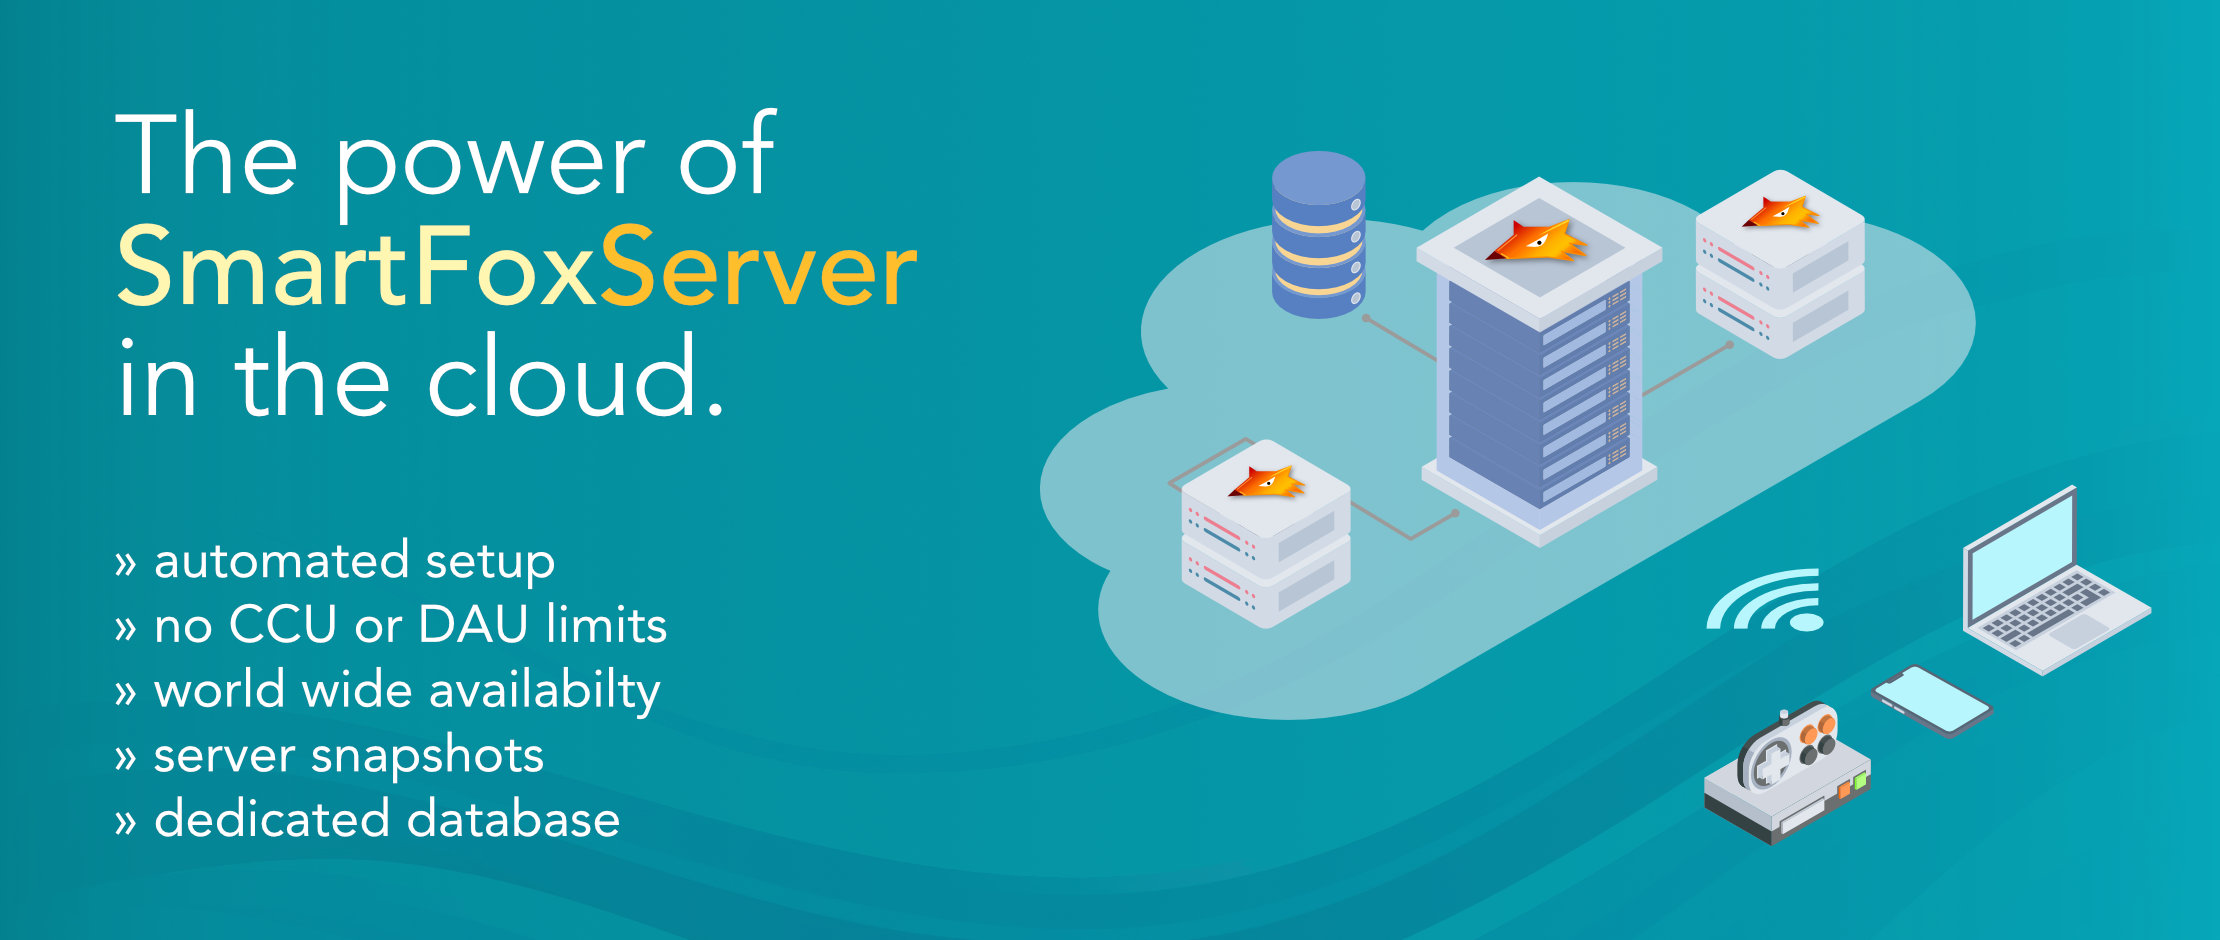 The power of SmartFoxServer in the cloud